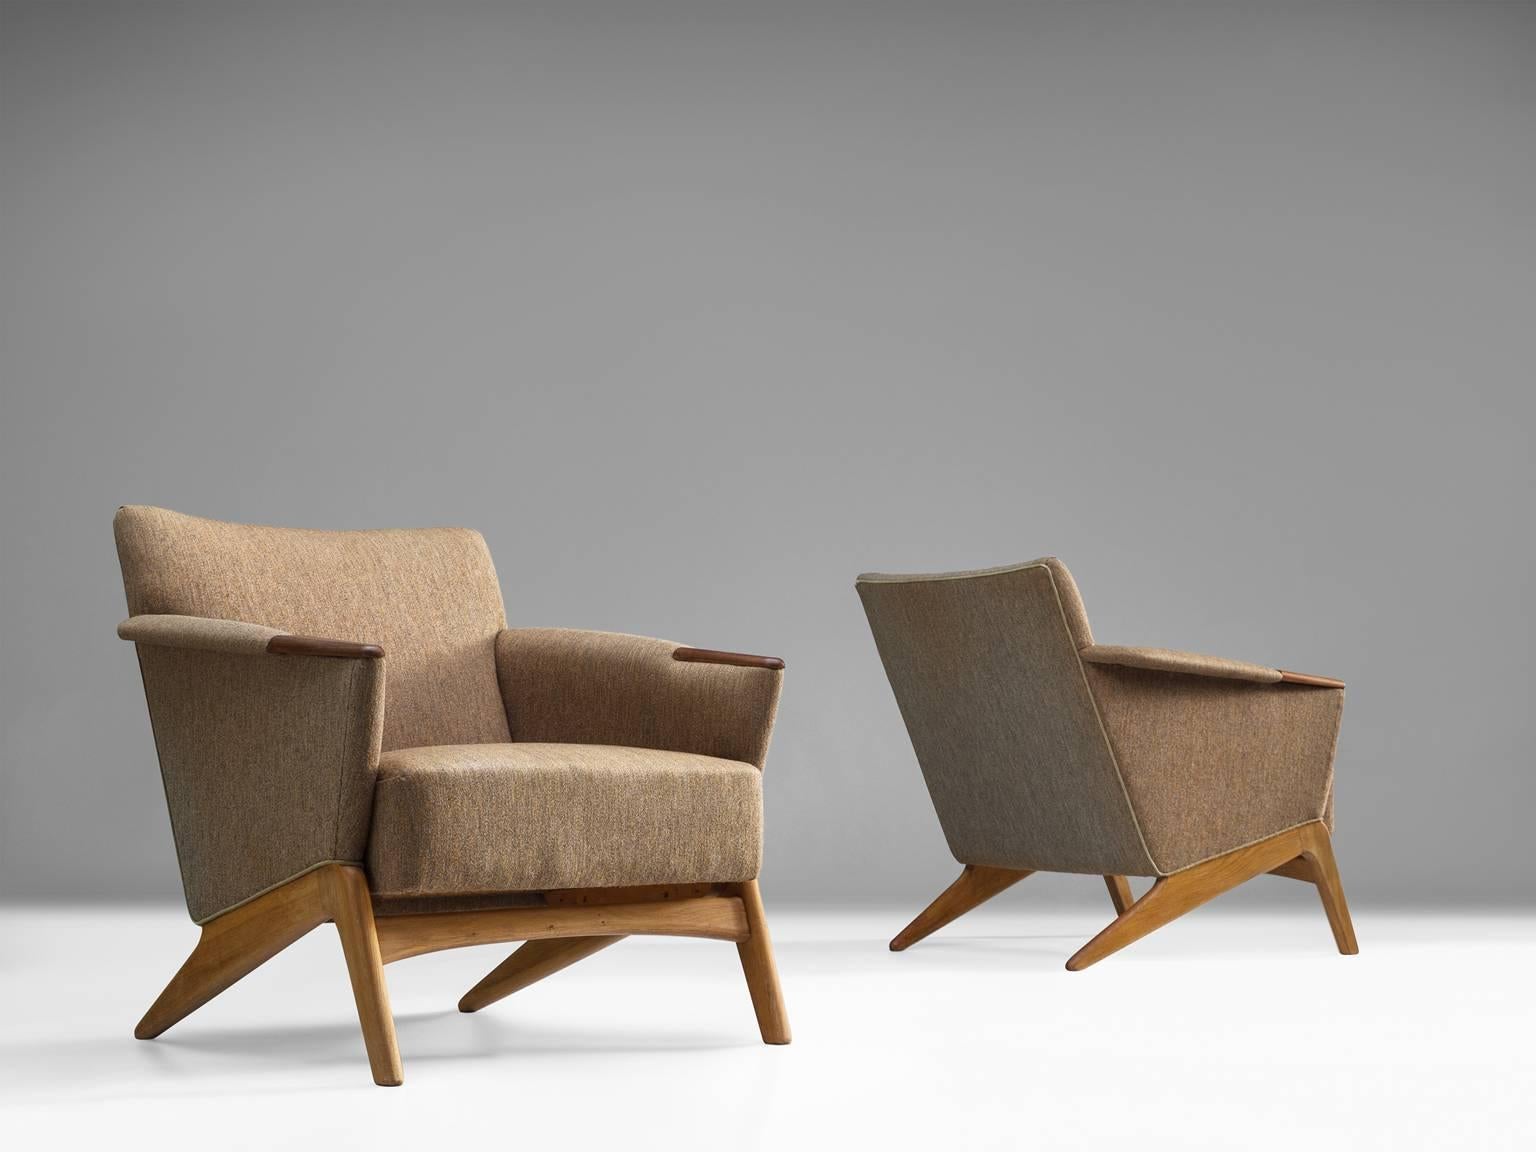 Armchairs, teak, oak, foam and fabric, Denmark, 1950s.

This pair of easy chairs has teak armrests and an oak base. The design is slightly tilted in order to provide maximum comfort. The grey fabric has a muted effect together with the natural